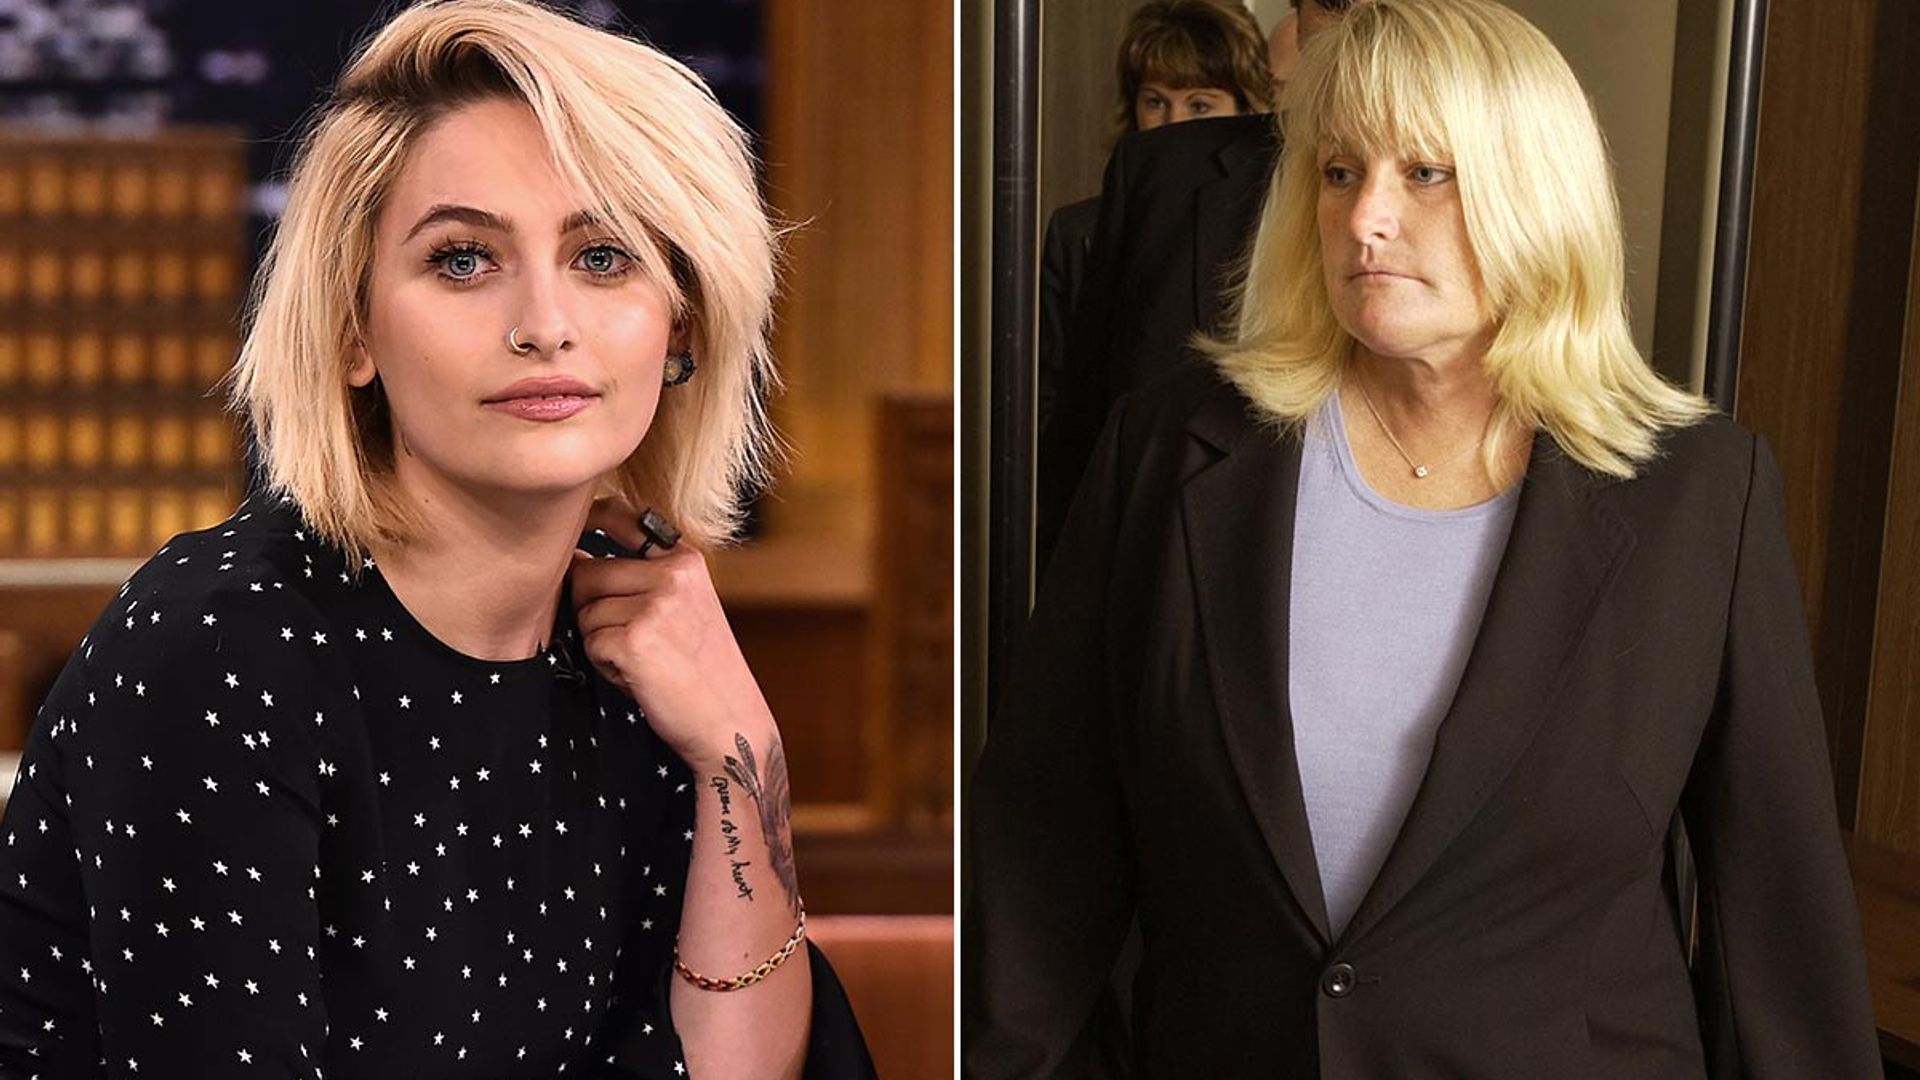 Paris Jackson opens up about her current relationship with her mum Debbie Rowe